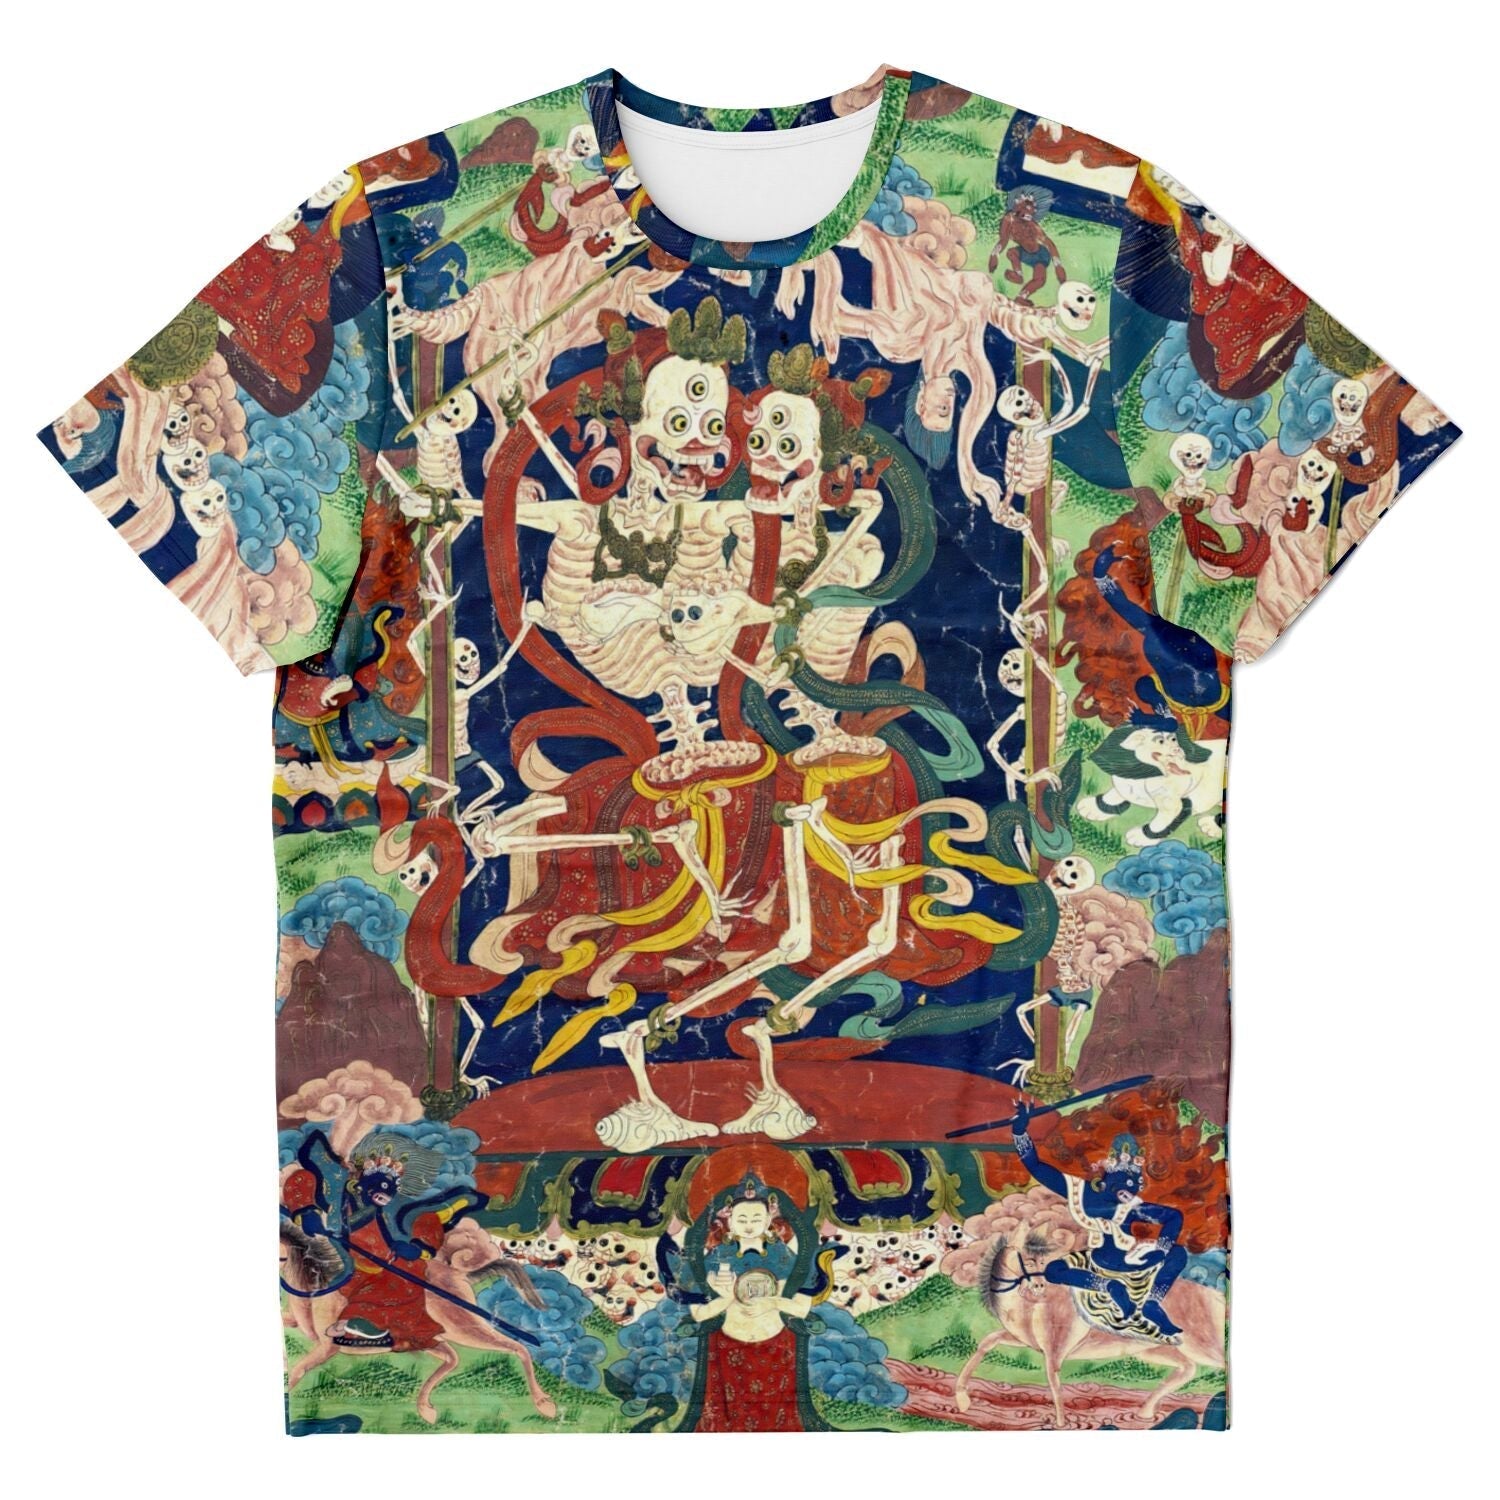 T-shirt XS Citipati Skeleton Deity | Tibetan Buddhist Lords of the Cemetery | Dance of Death Graphic Art T-Shirt